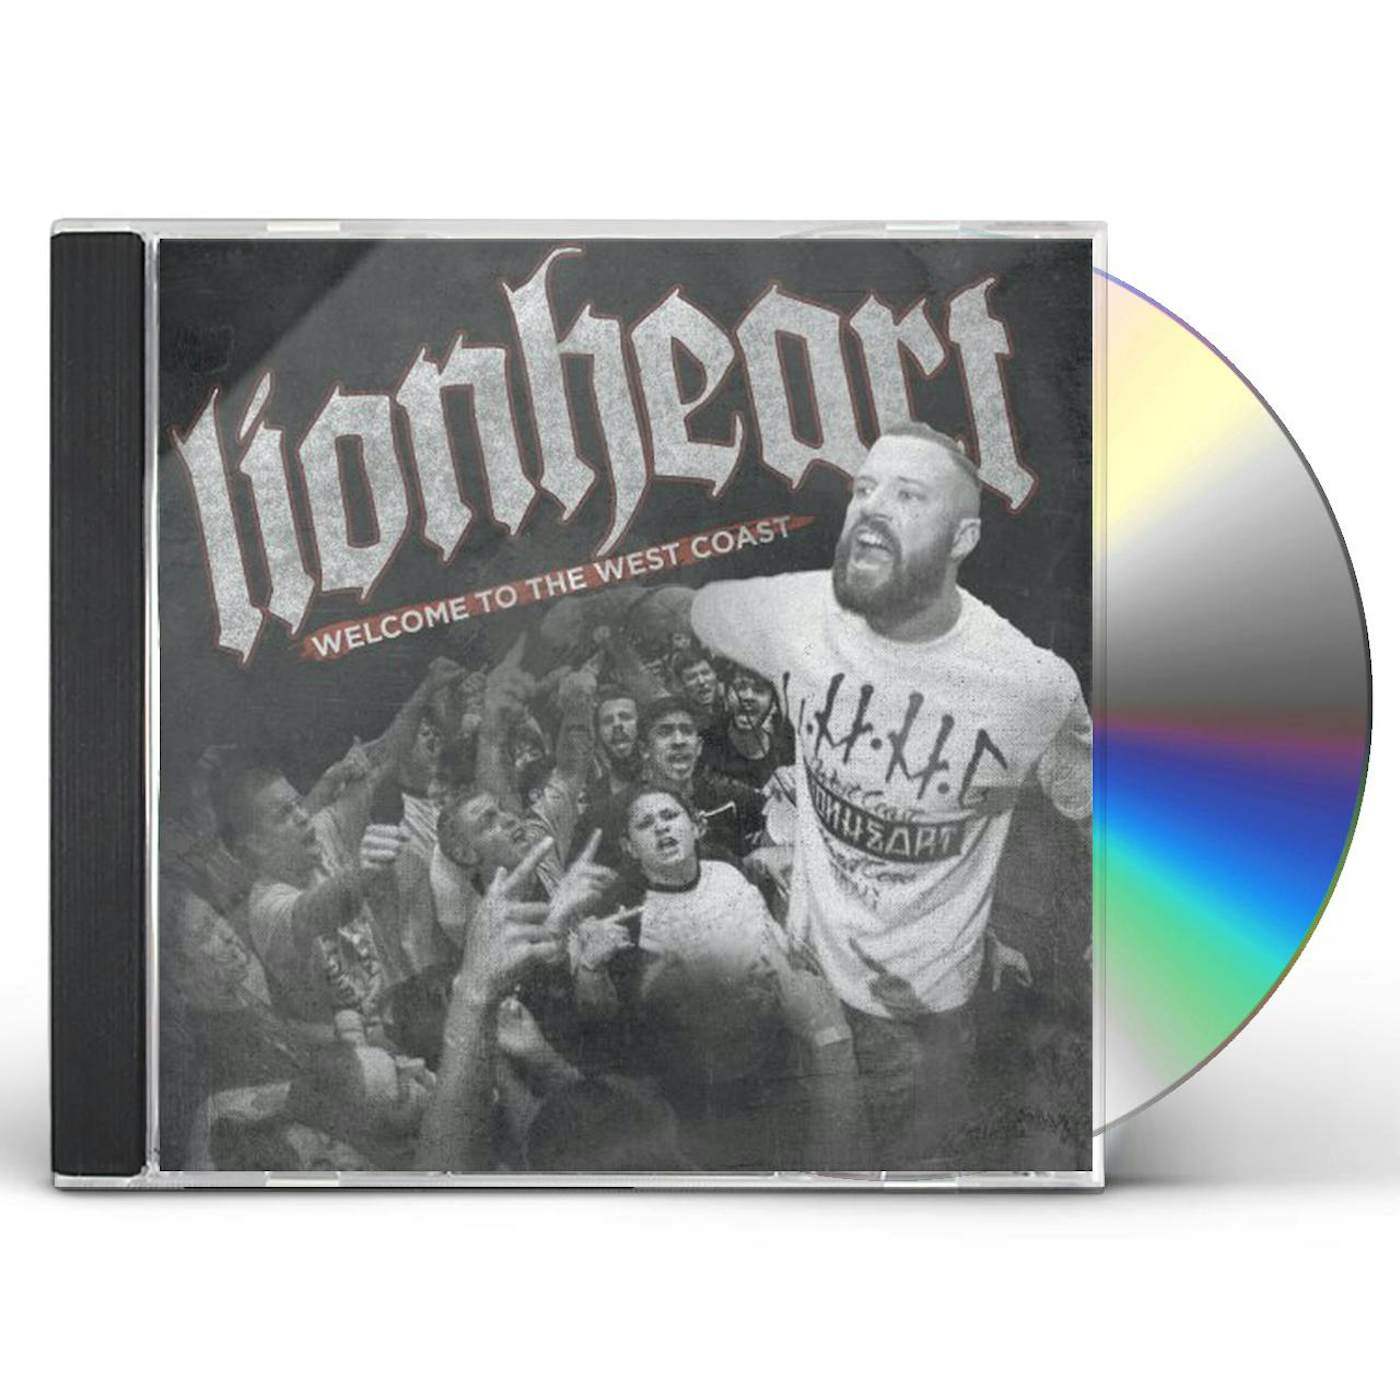 Lionheart WELCOME TO THE WEST COAST CD